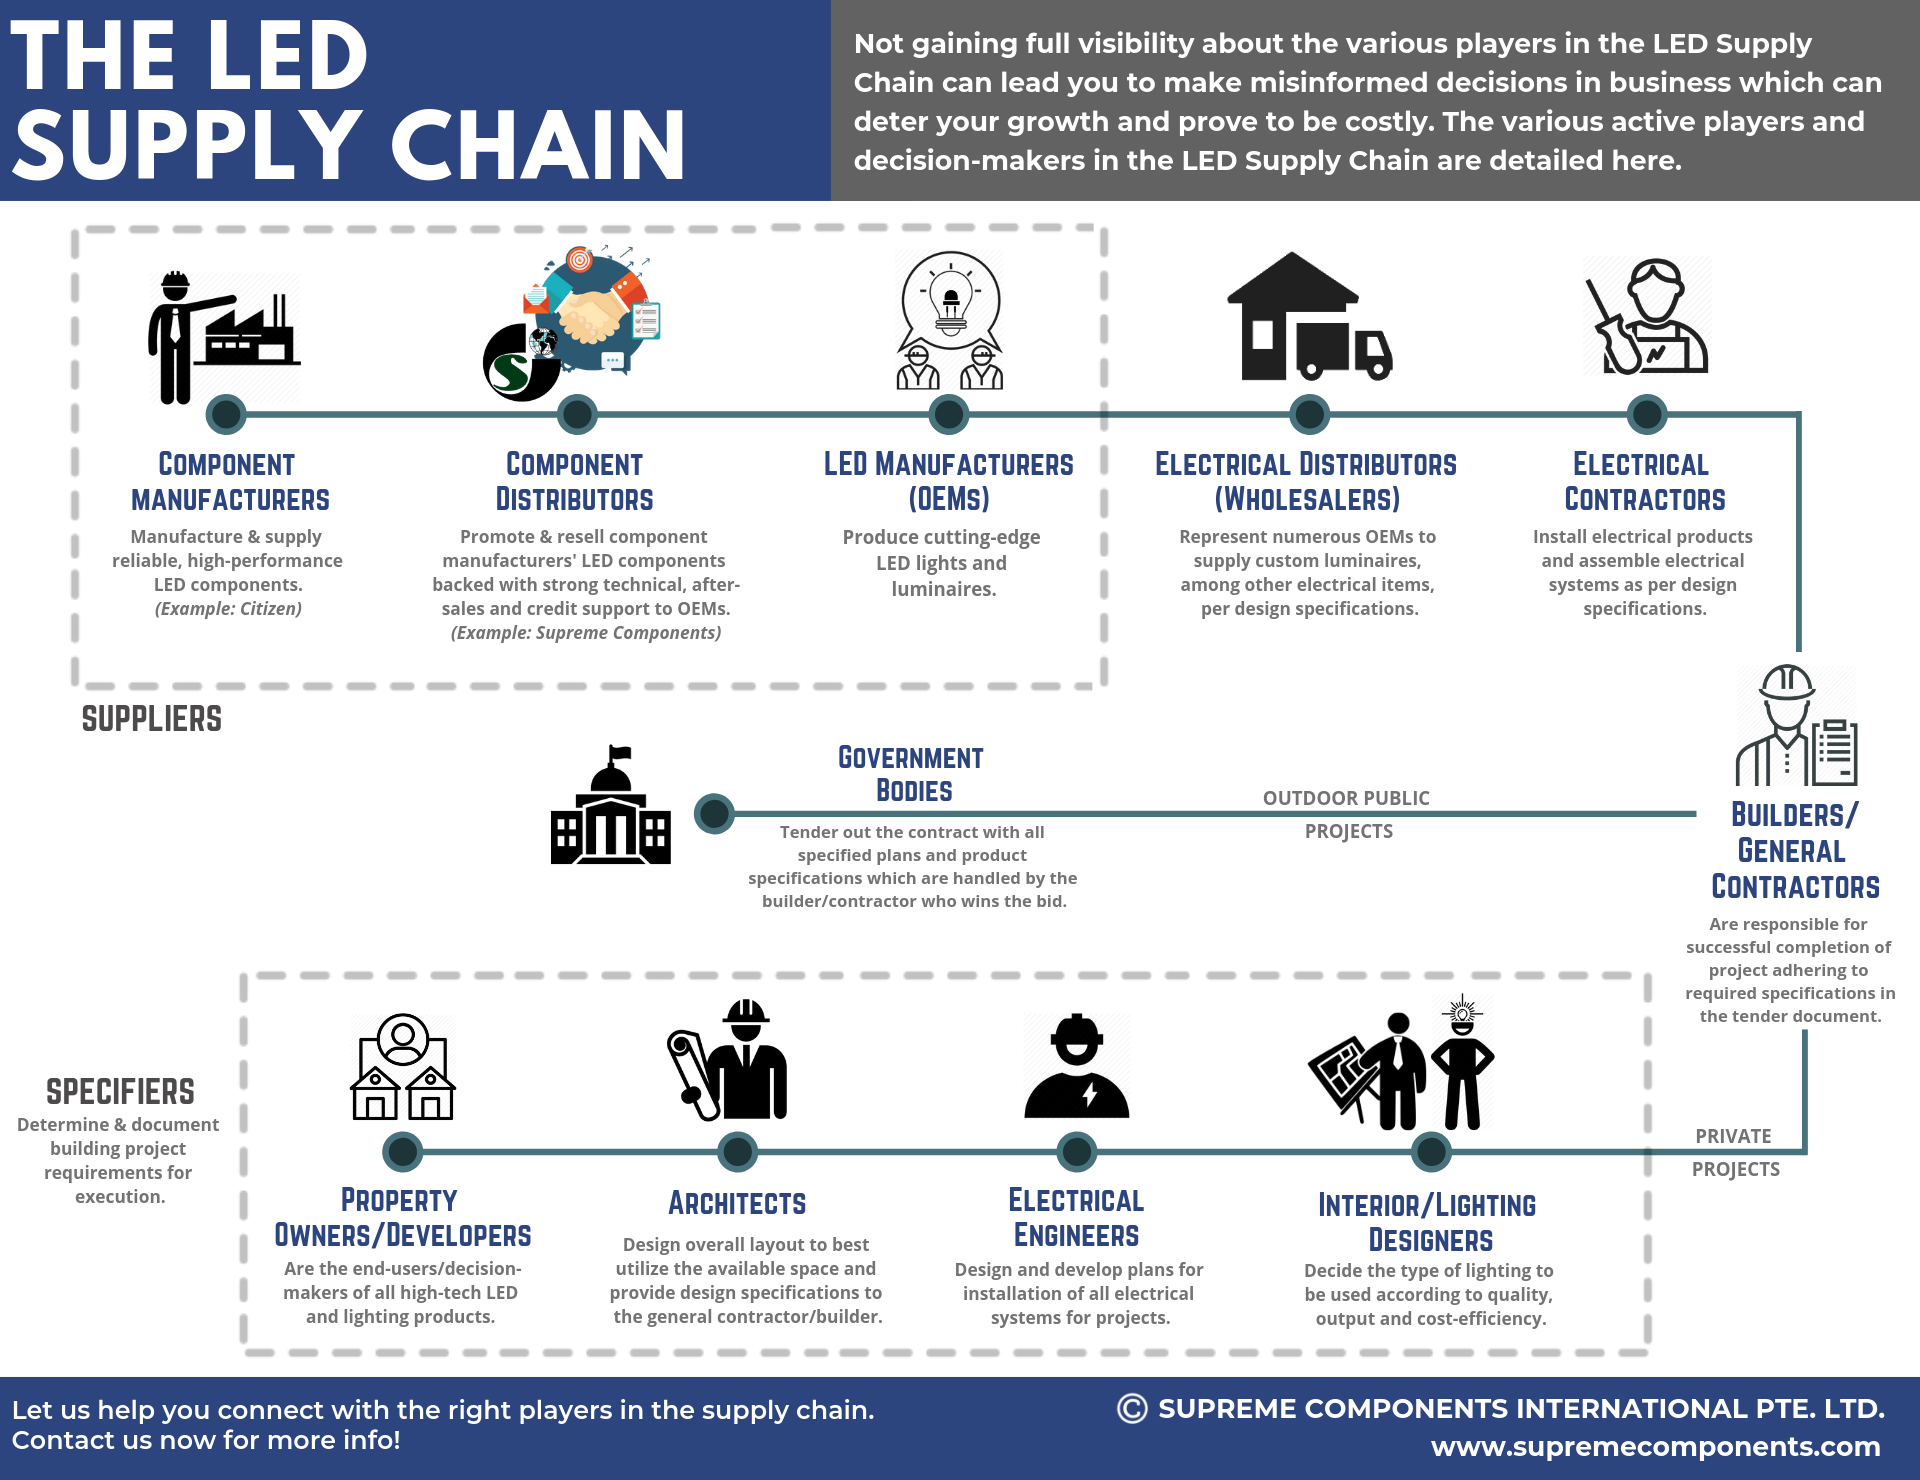 LED Supply Chain - The Complete Ecosystem